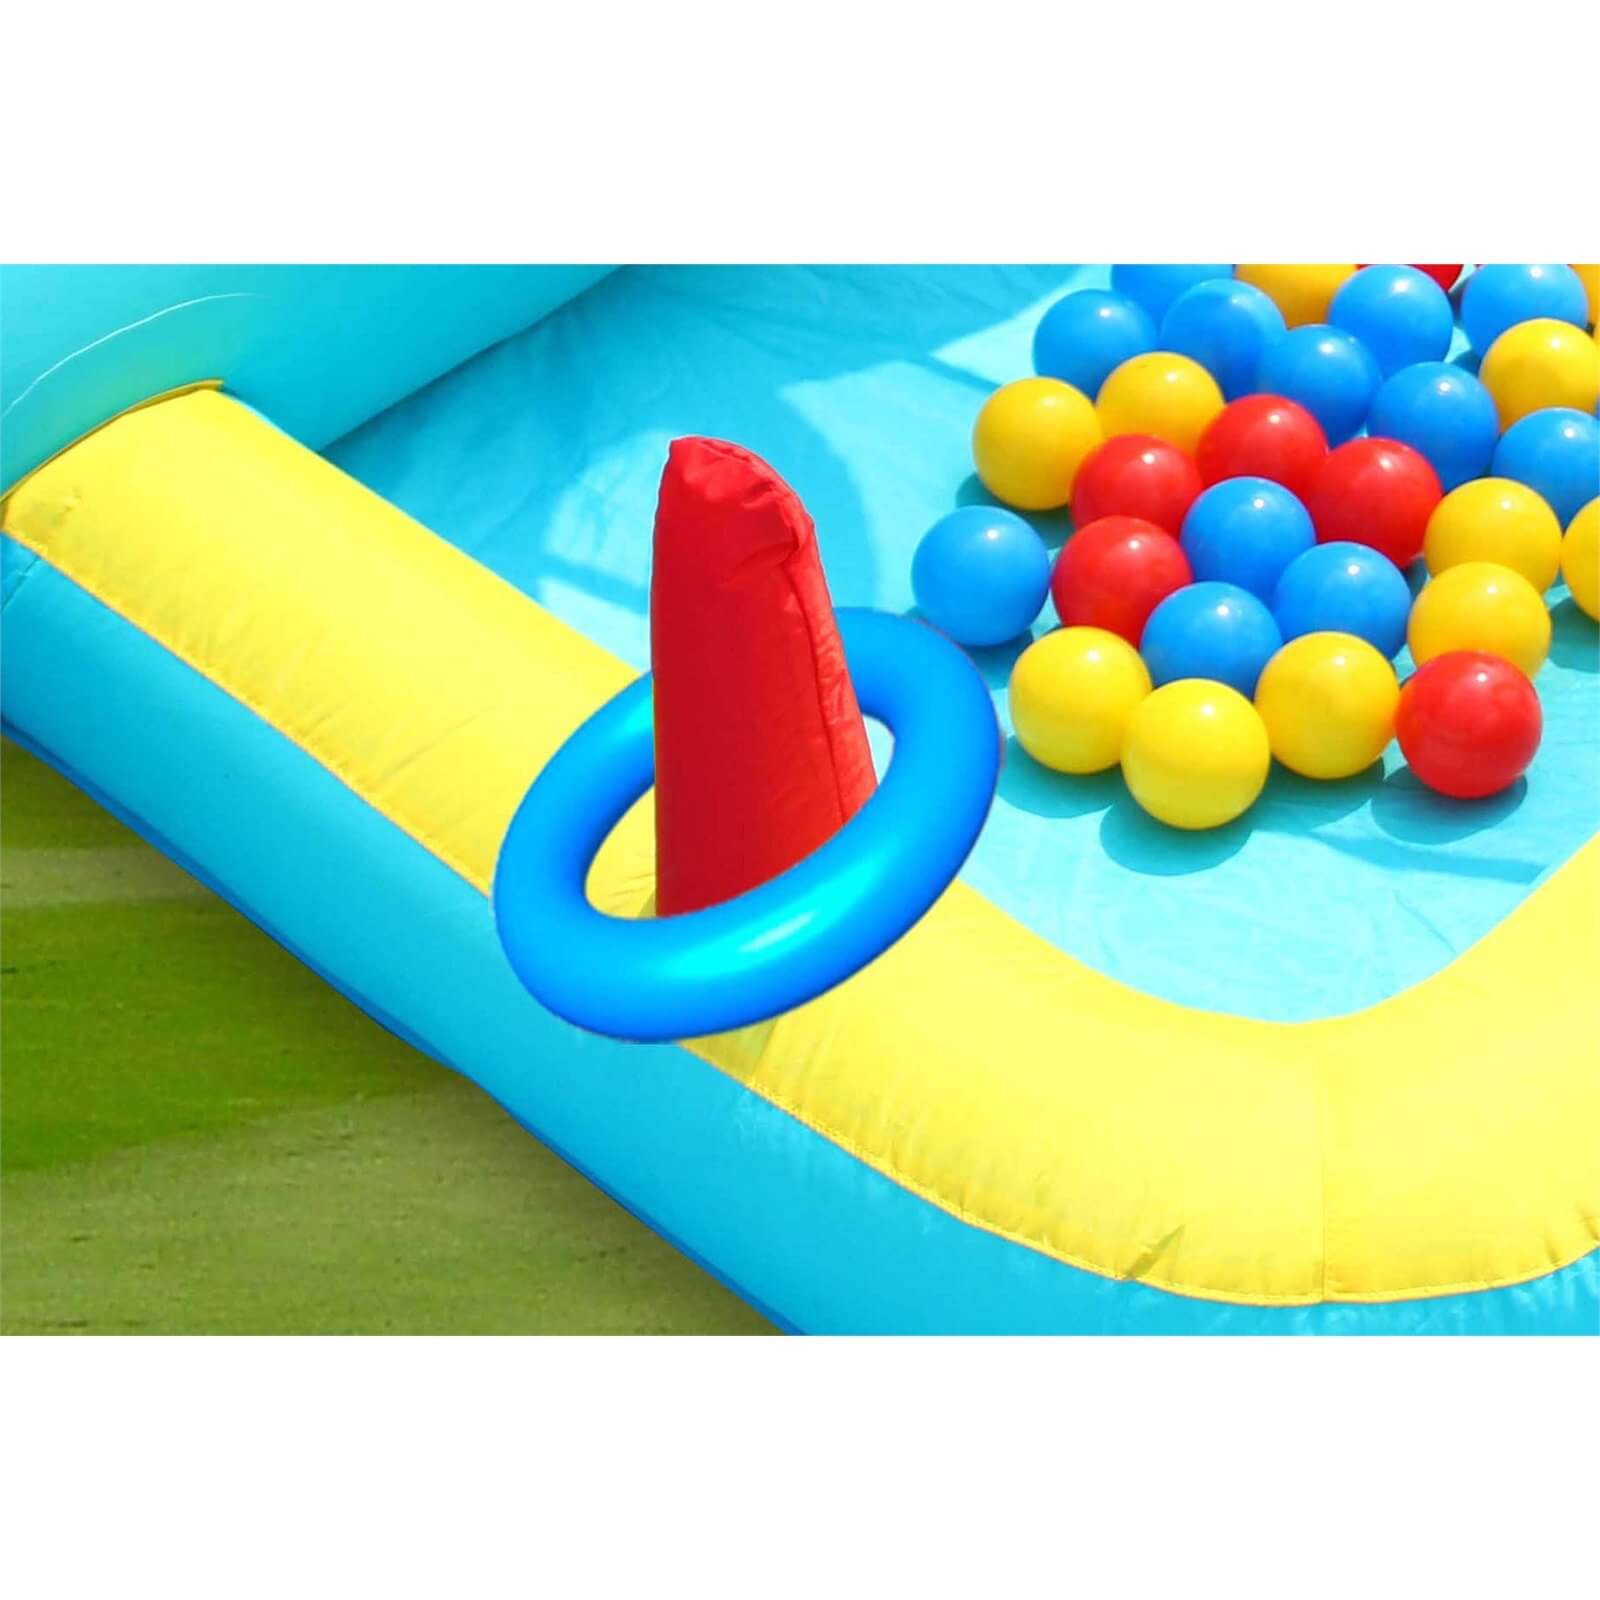 Happy Hop Inflatable With Slide Adventure Combo